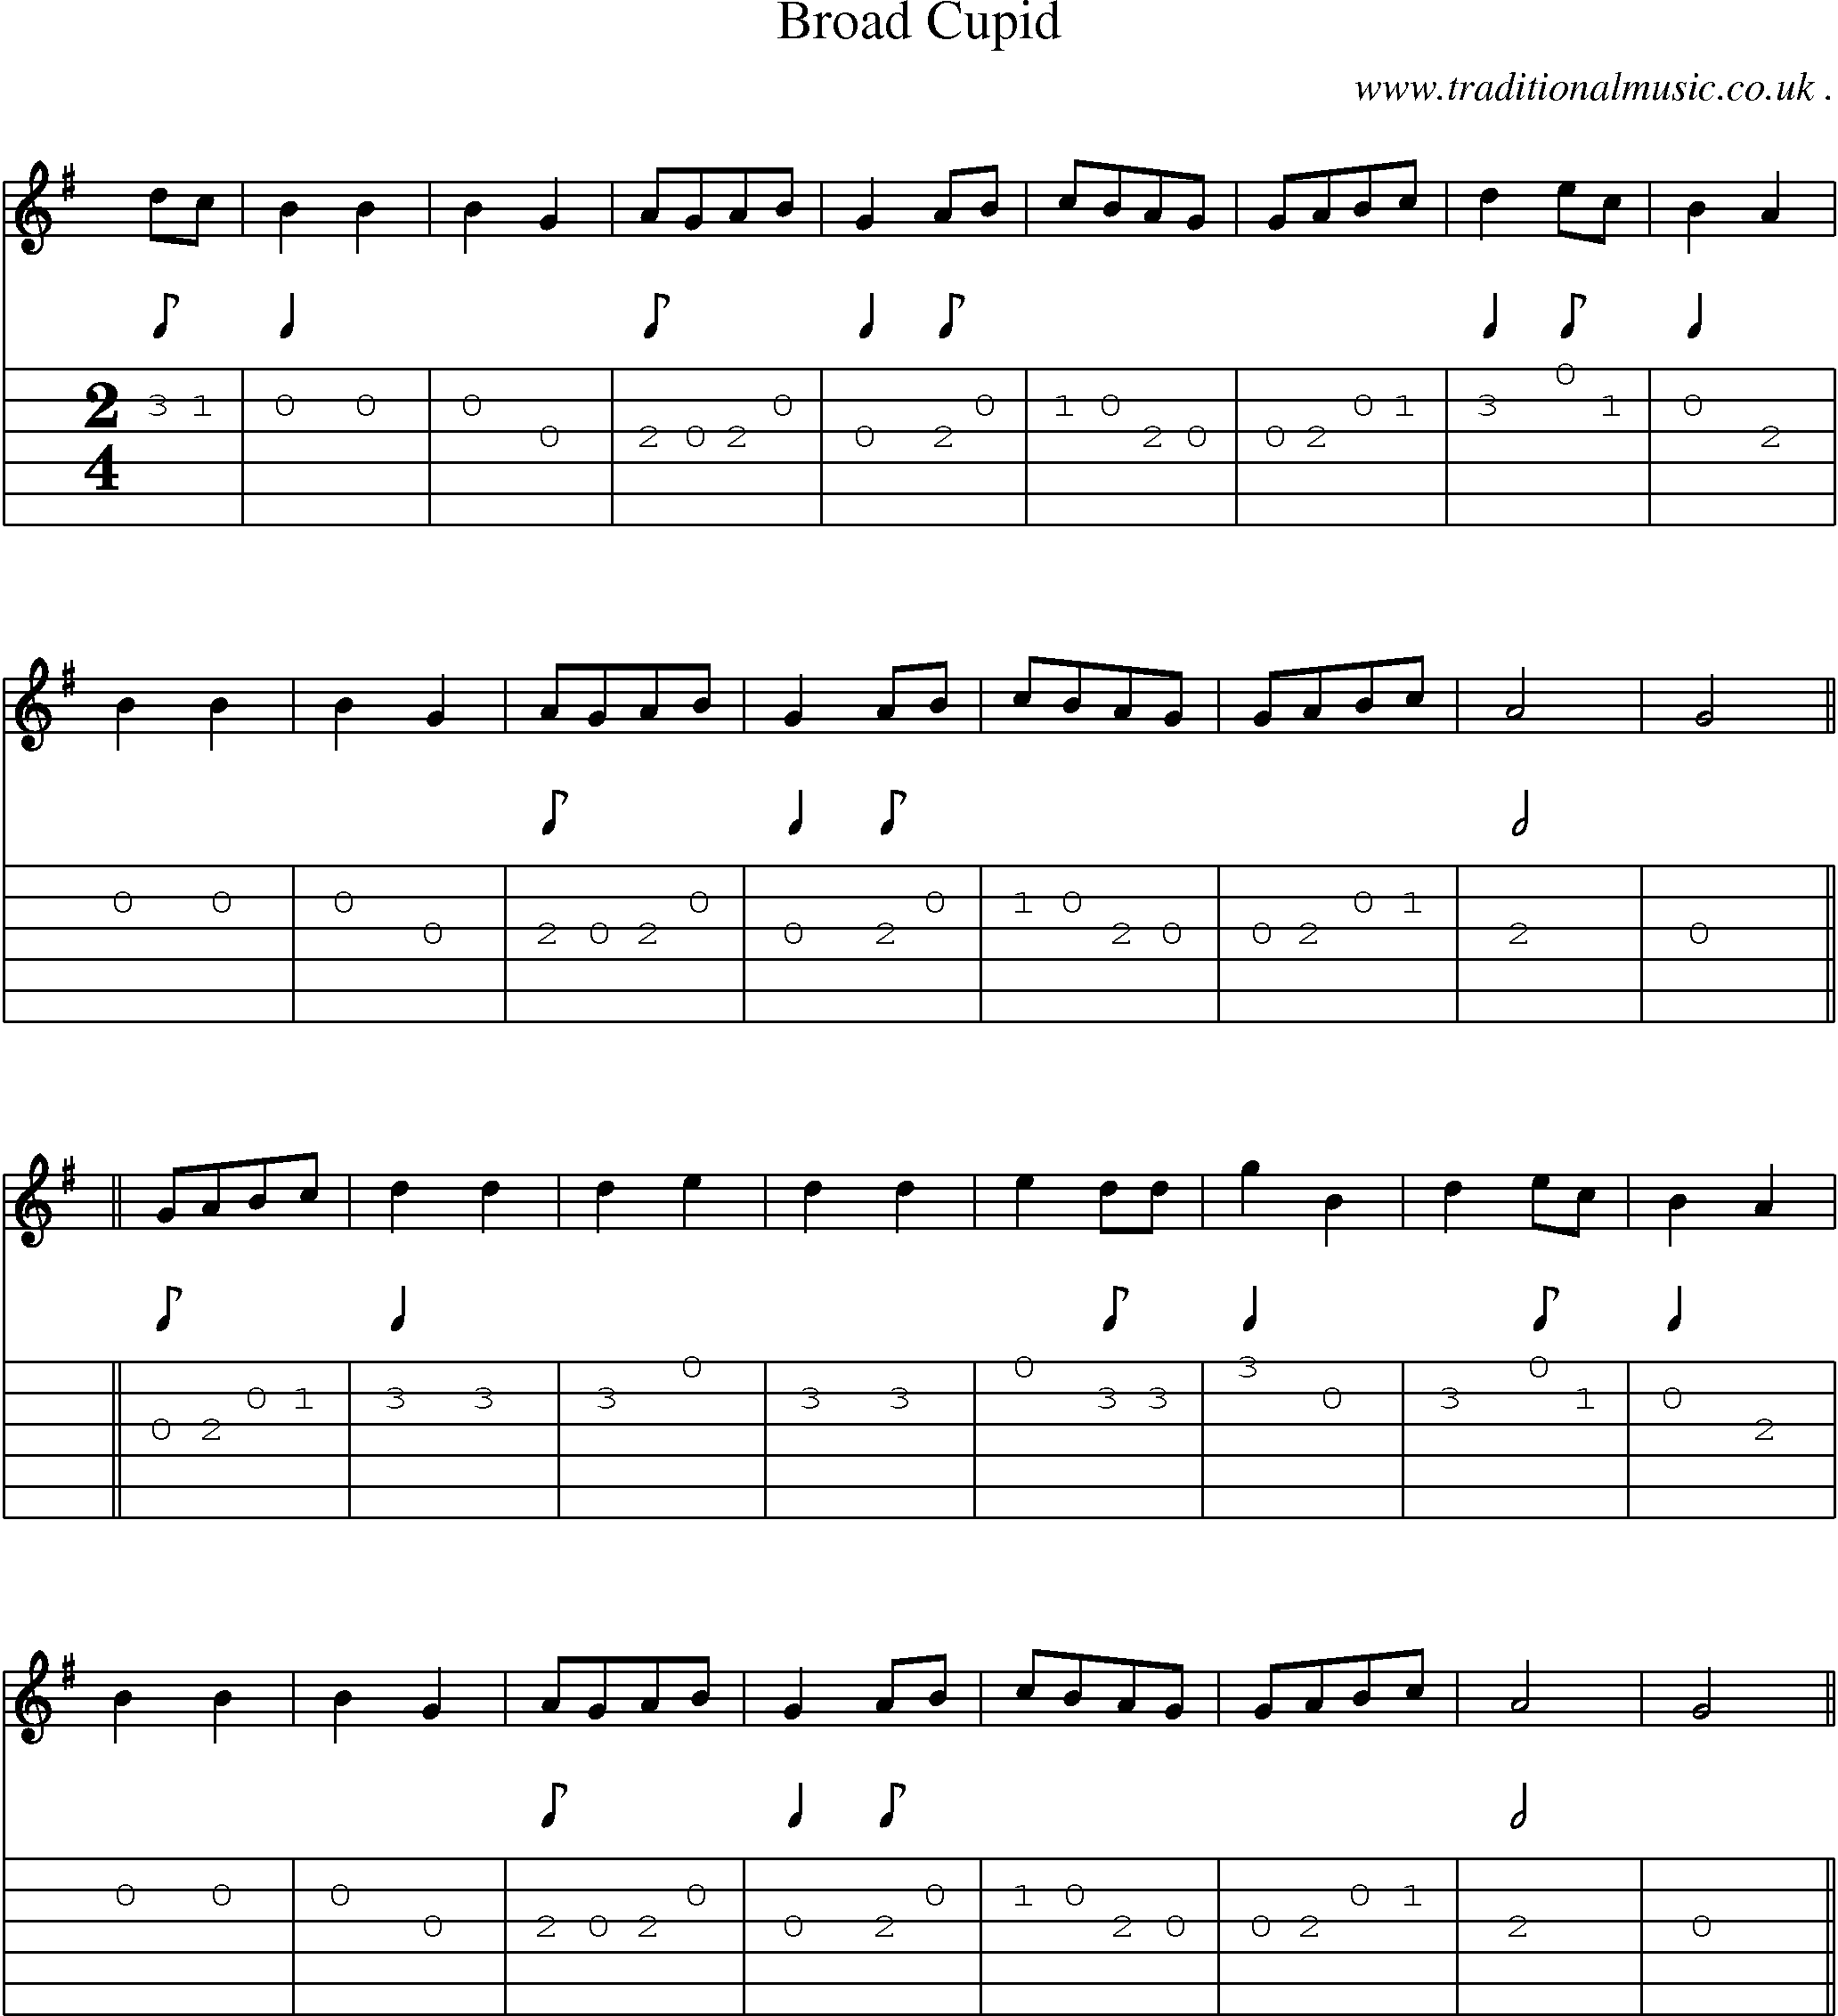 Sheet-Music and Guitar Tabs for Broad Cupid